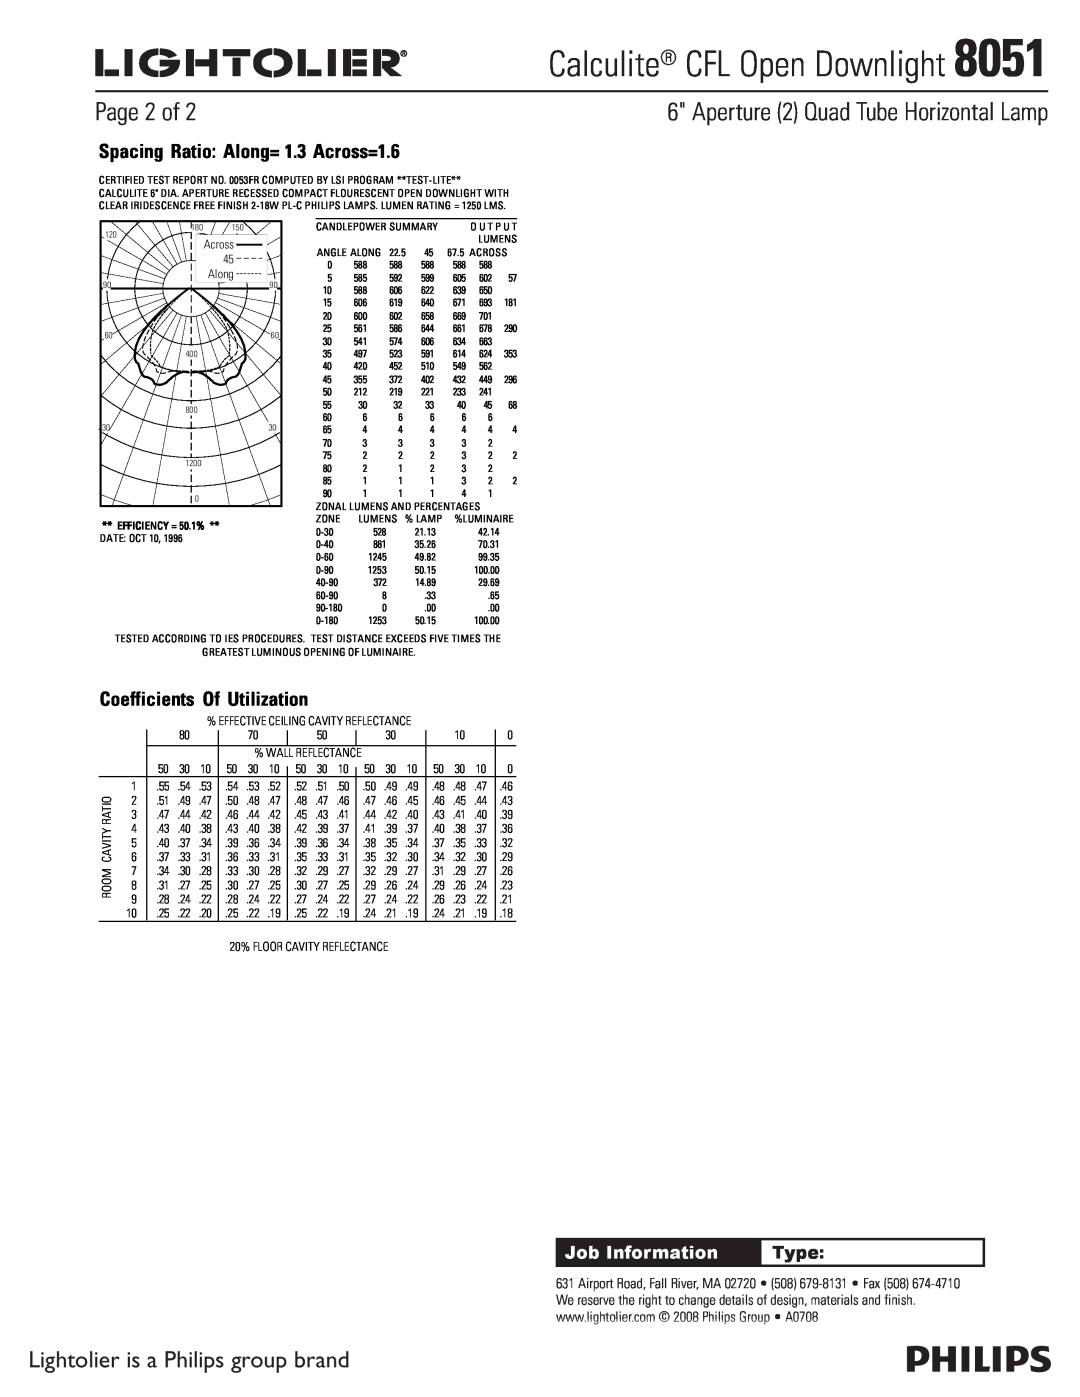 Lightolier 8051 Page 2 of, Spacing Ratio Along= 1.3 Across=1.6, Coefficients Of Utilization, Calculite CFL Open Downlight 